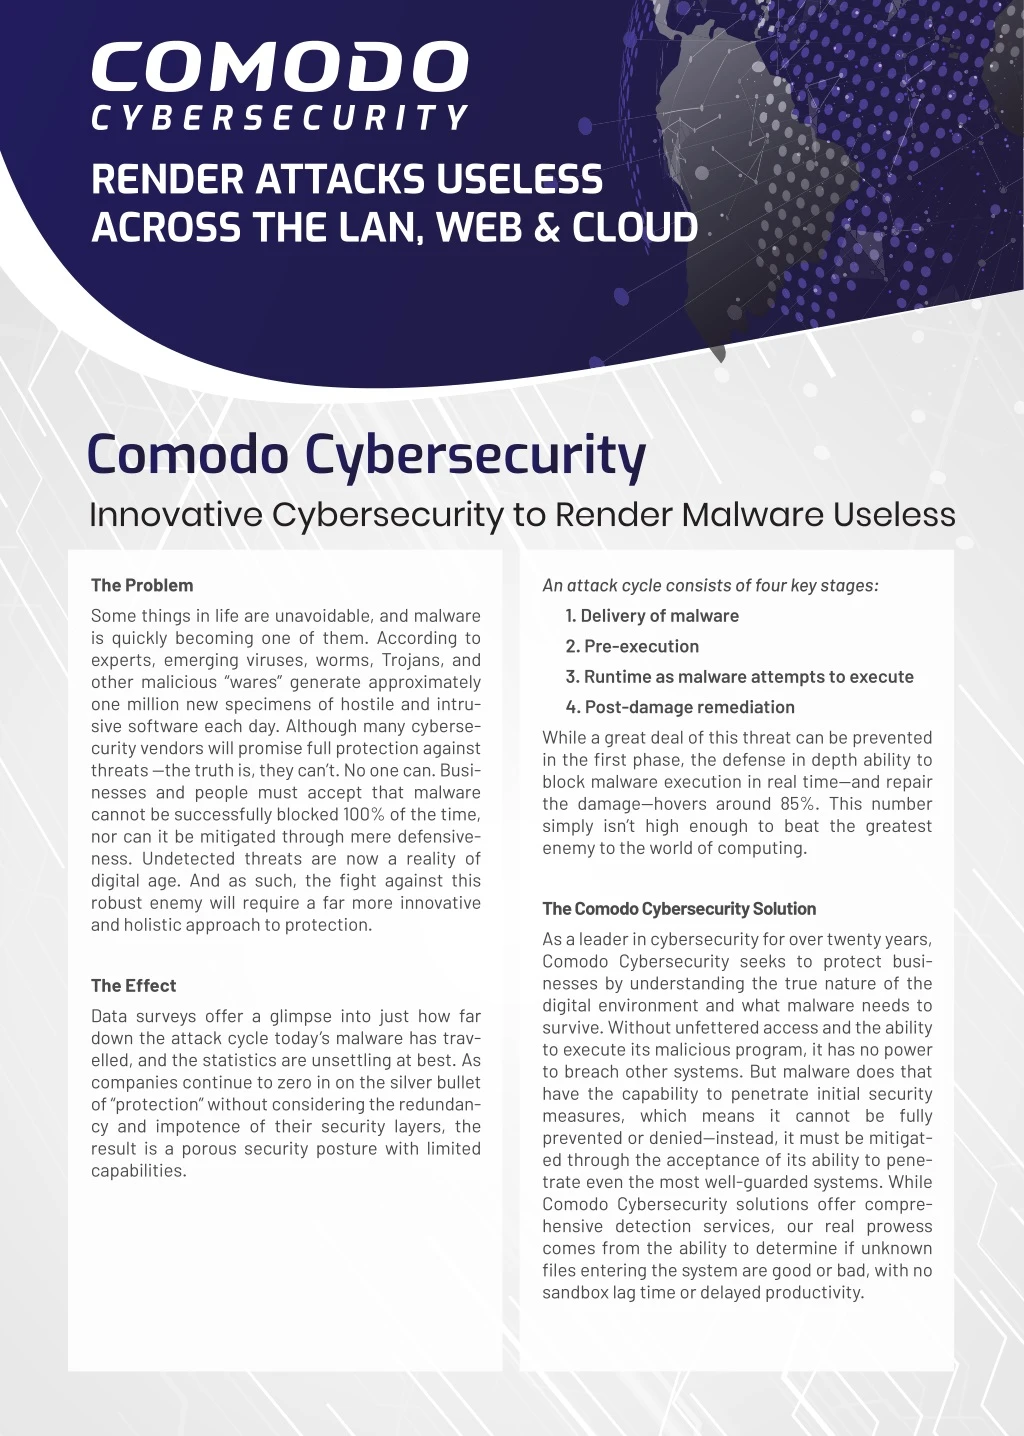 comodo containment technology does not block